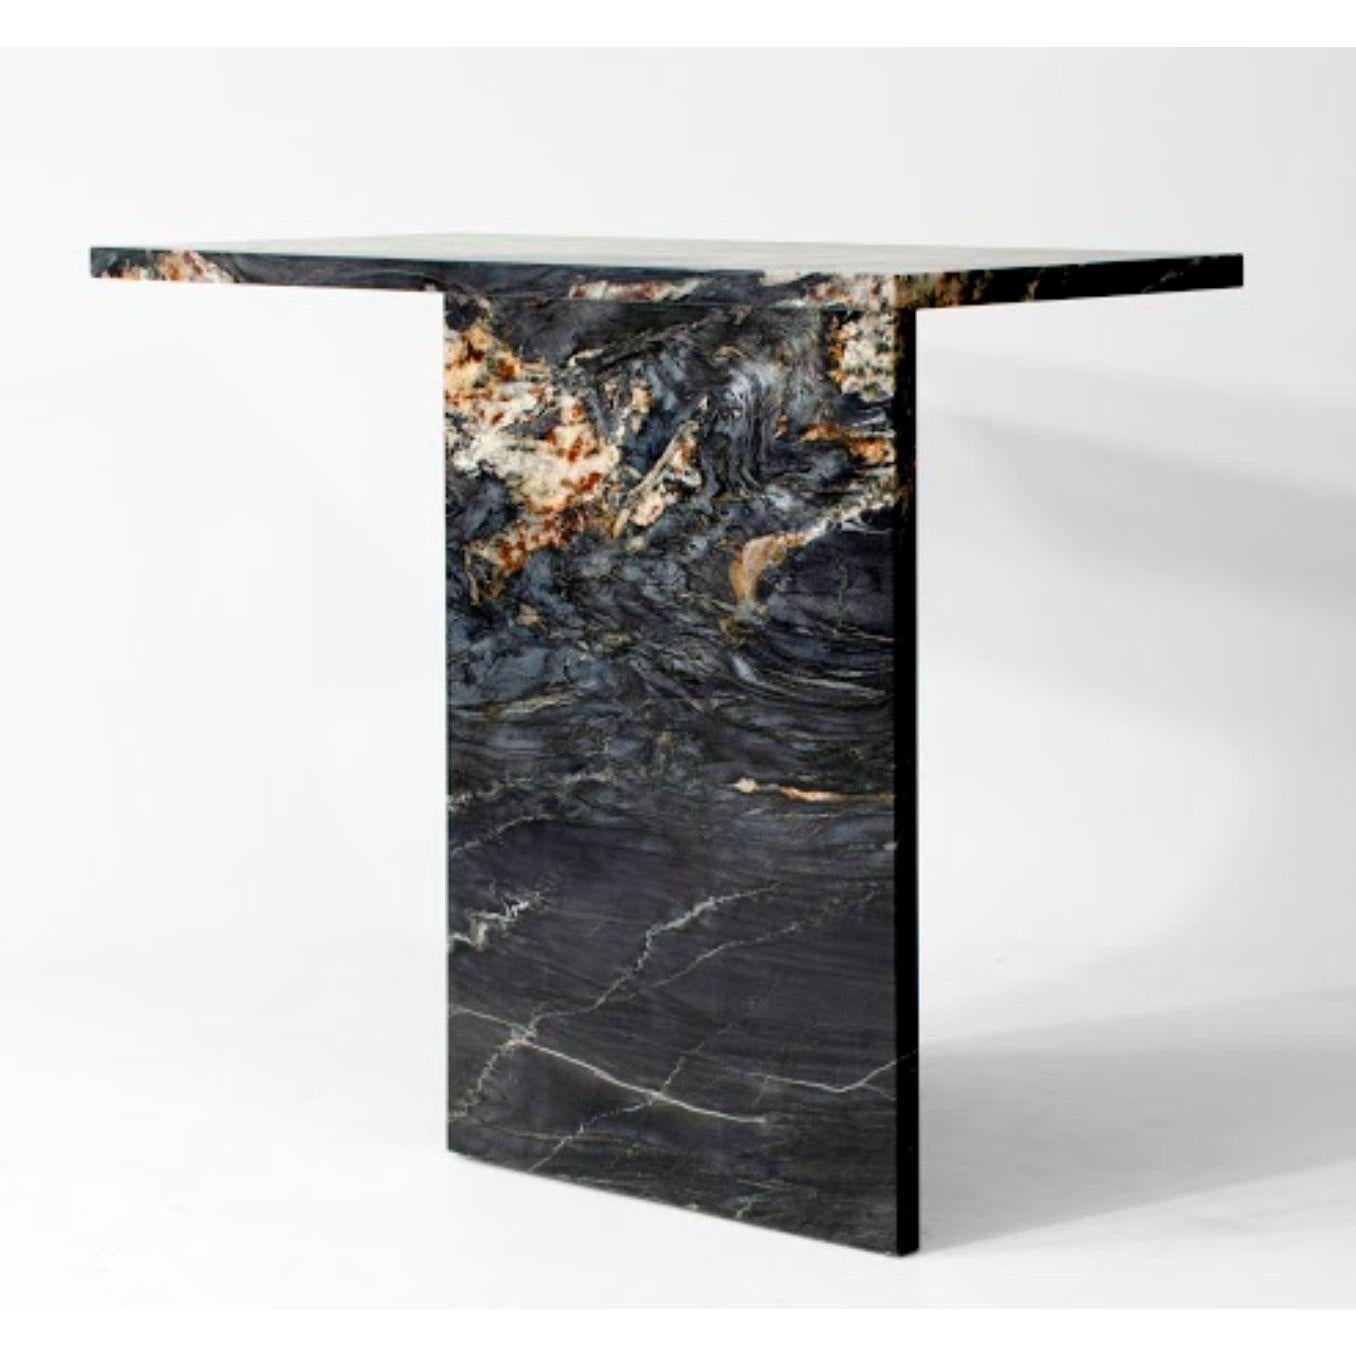 And So I stand console table by Claste
Dimensions: D 45.7 x W 91.4 x H 76.2 cm
Material: Marble
Weight: 186 kg

Since 2017 Quinlan Osborne has cultivated an aesthetic in his work that is rooted in the passion for contemporary design he